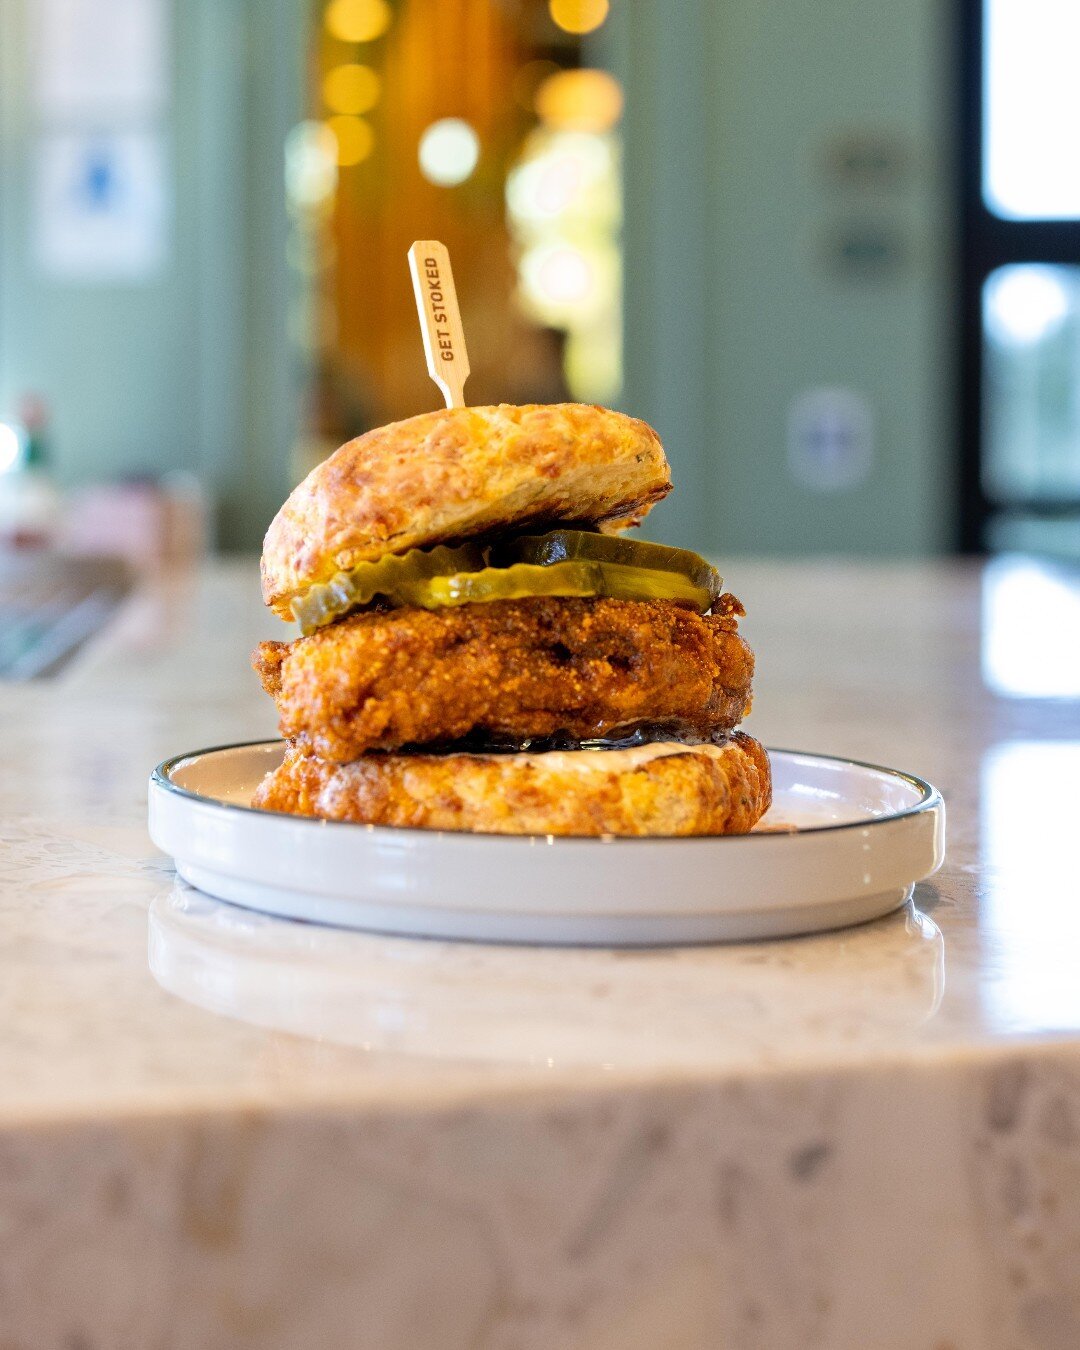 This Hot Fried Chicken Sandwich is a must-order when you join us this Mother's Day for our Spring Brunch!  A beautiful piece of spicy fried chicken, pickles, and whipped maple all between a baked in-house cheddar scone 🌶